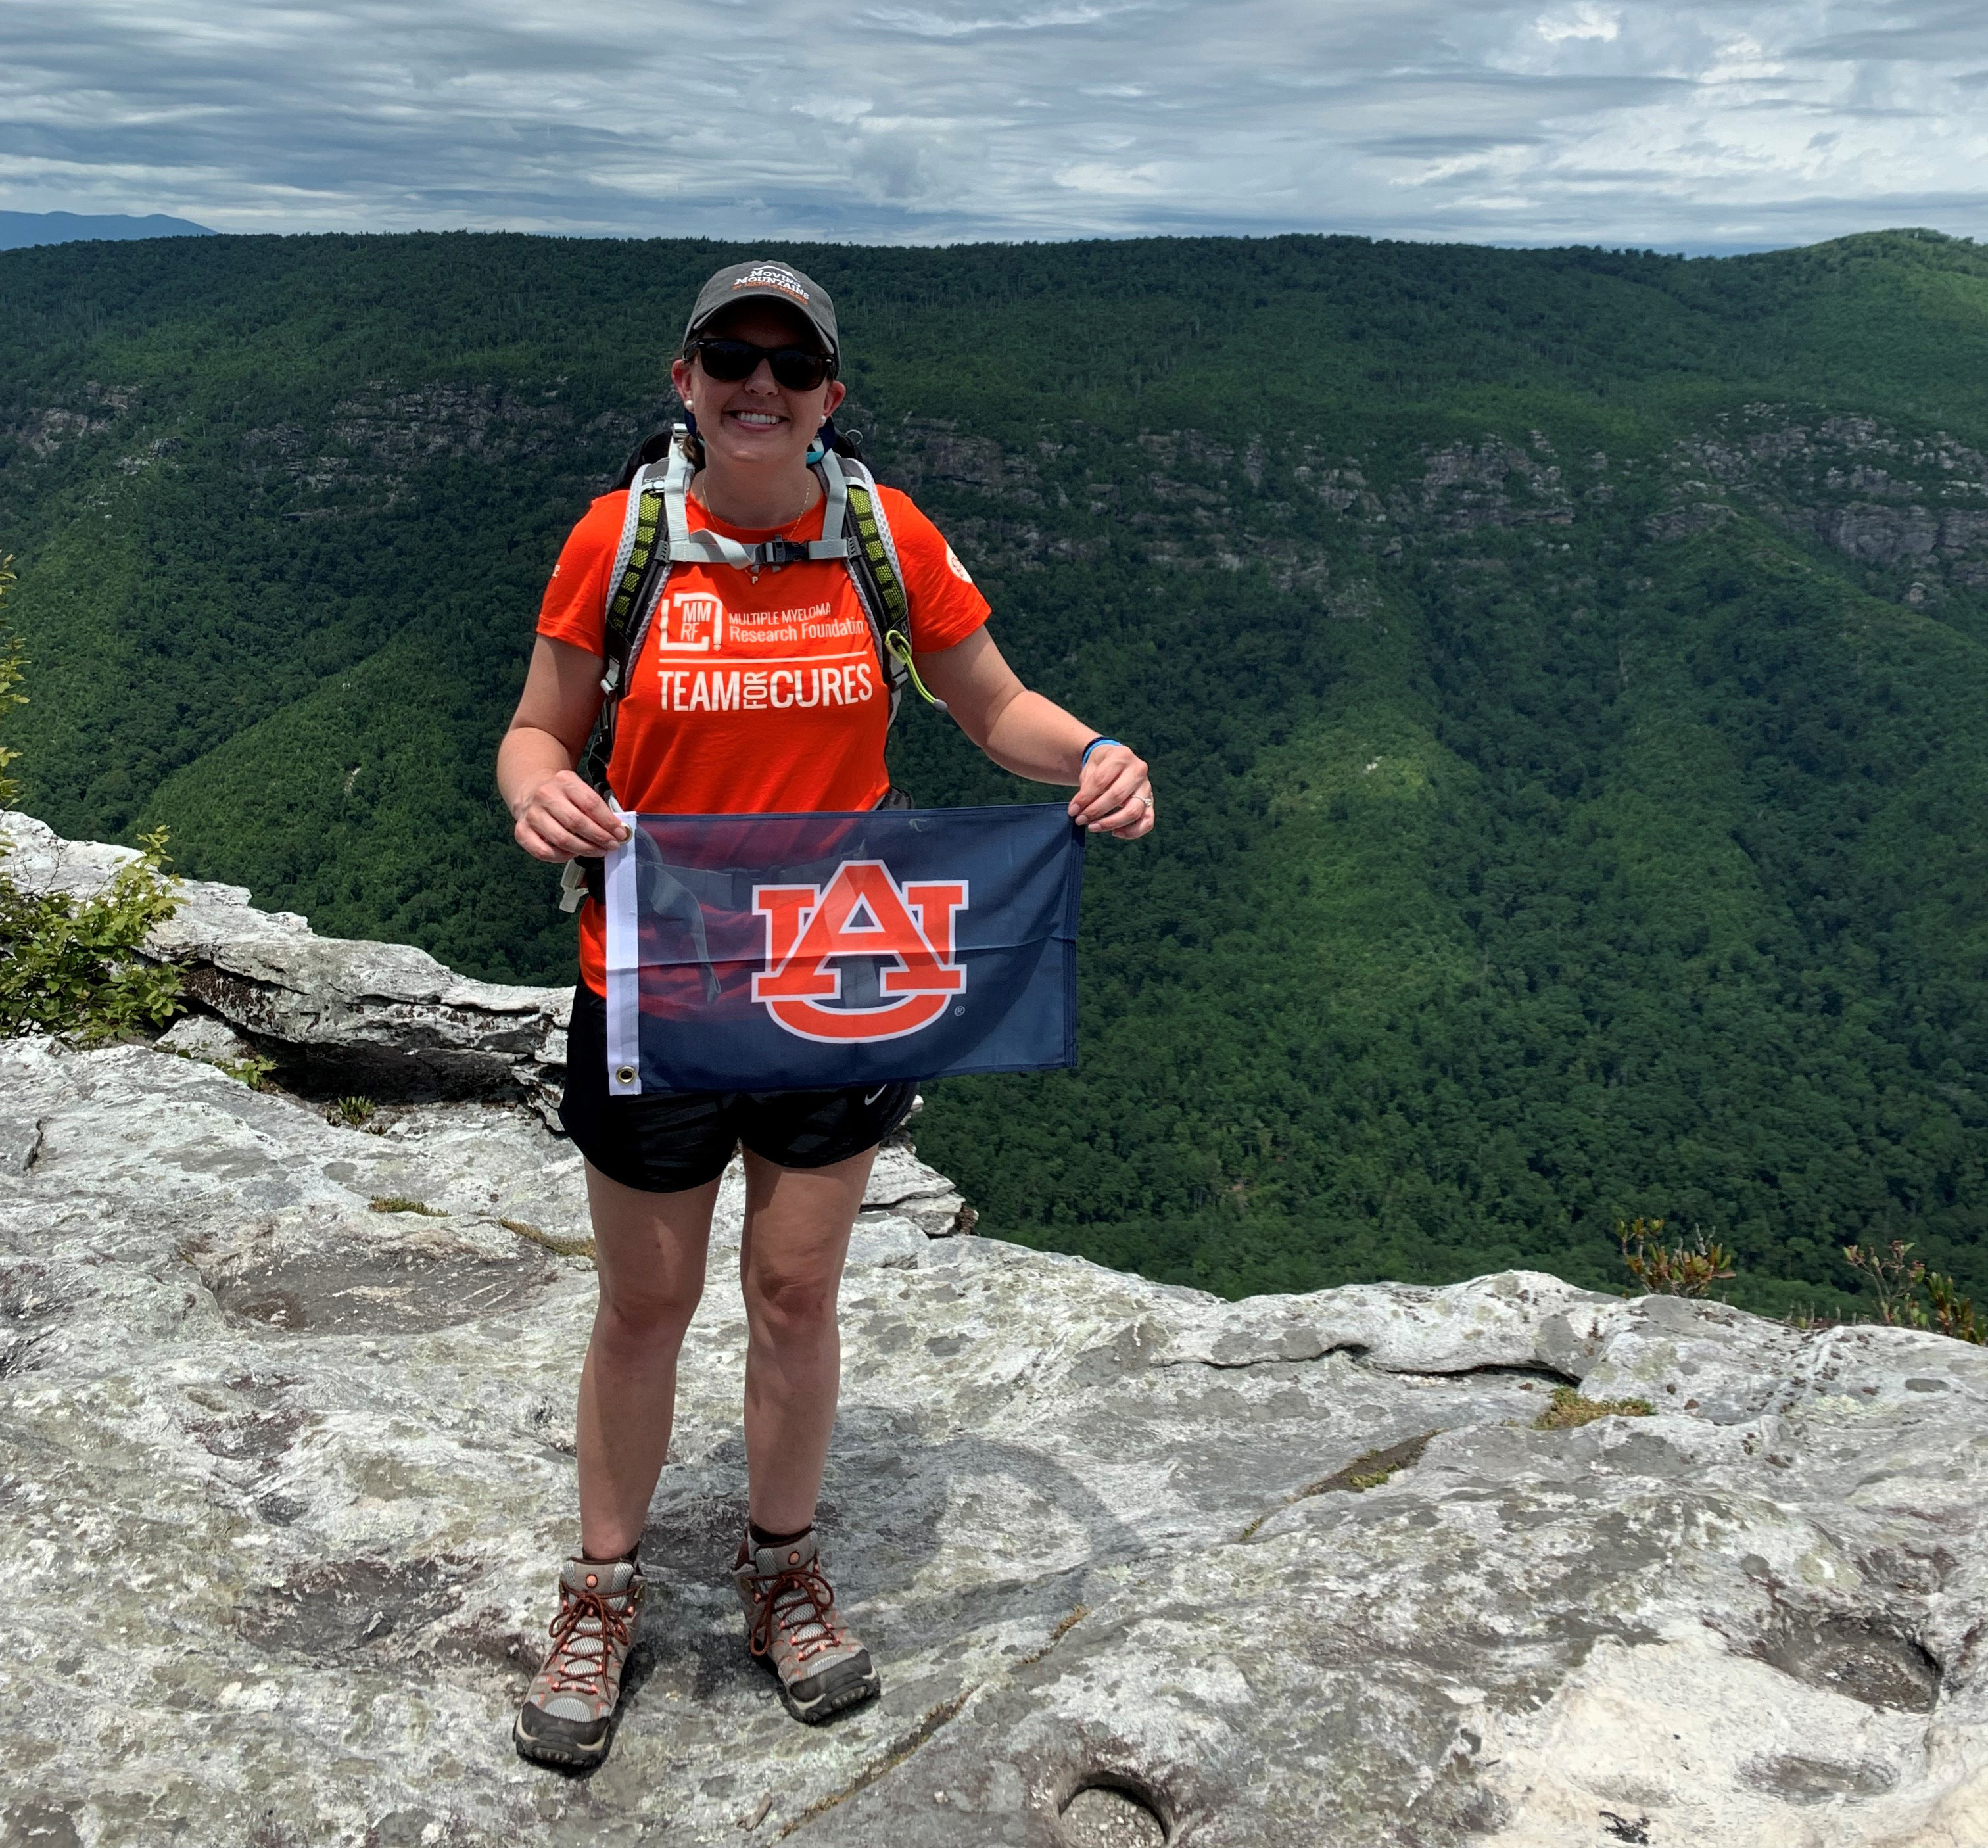 COSAM Advisor is “Moving Mountains” for Cancer Research